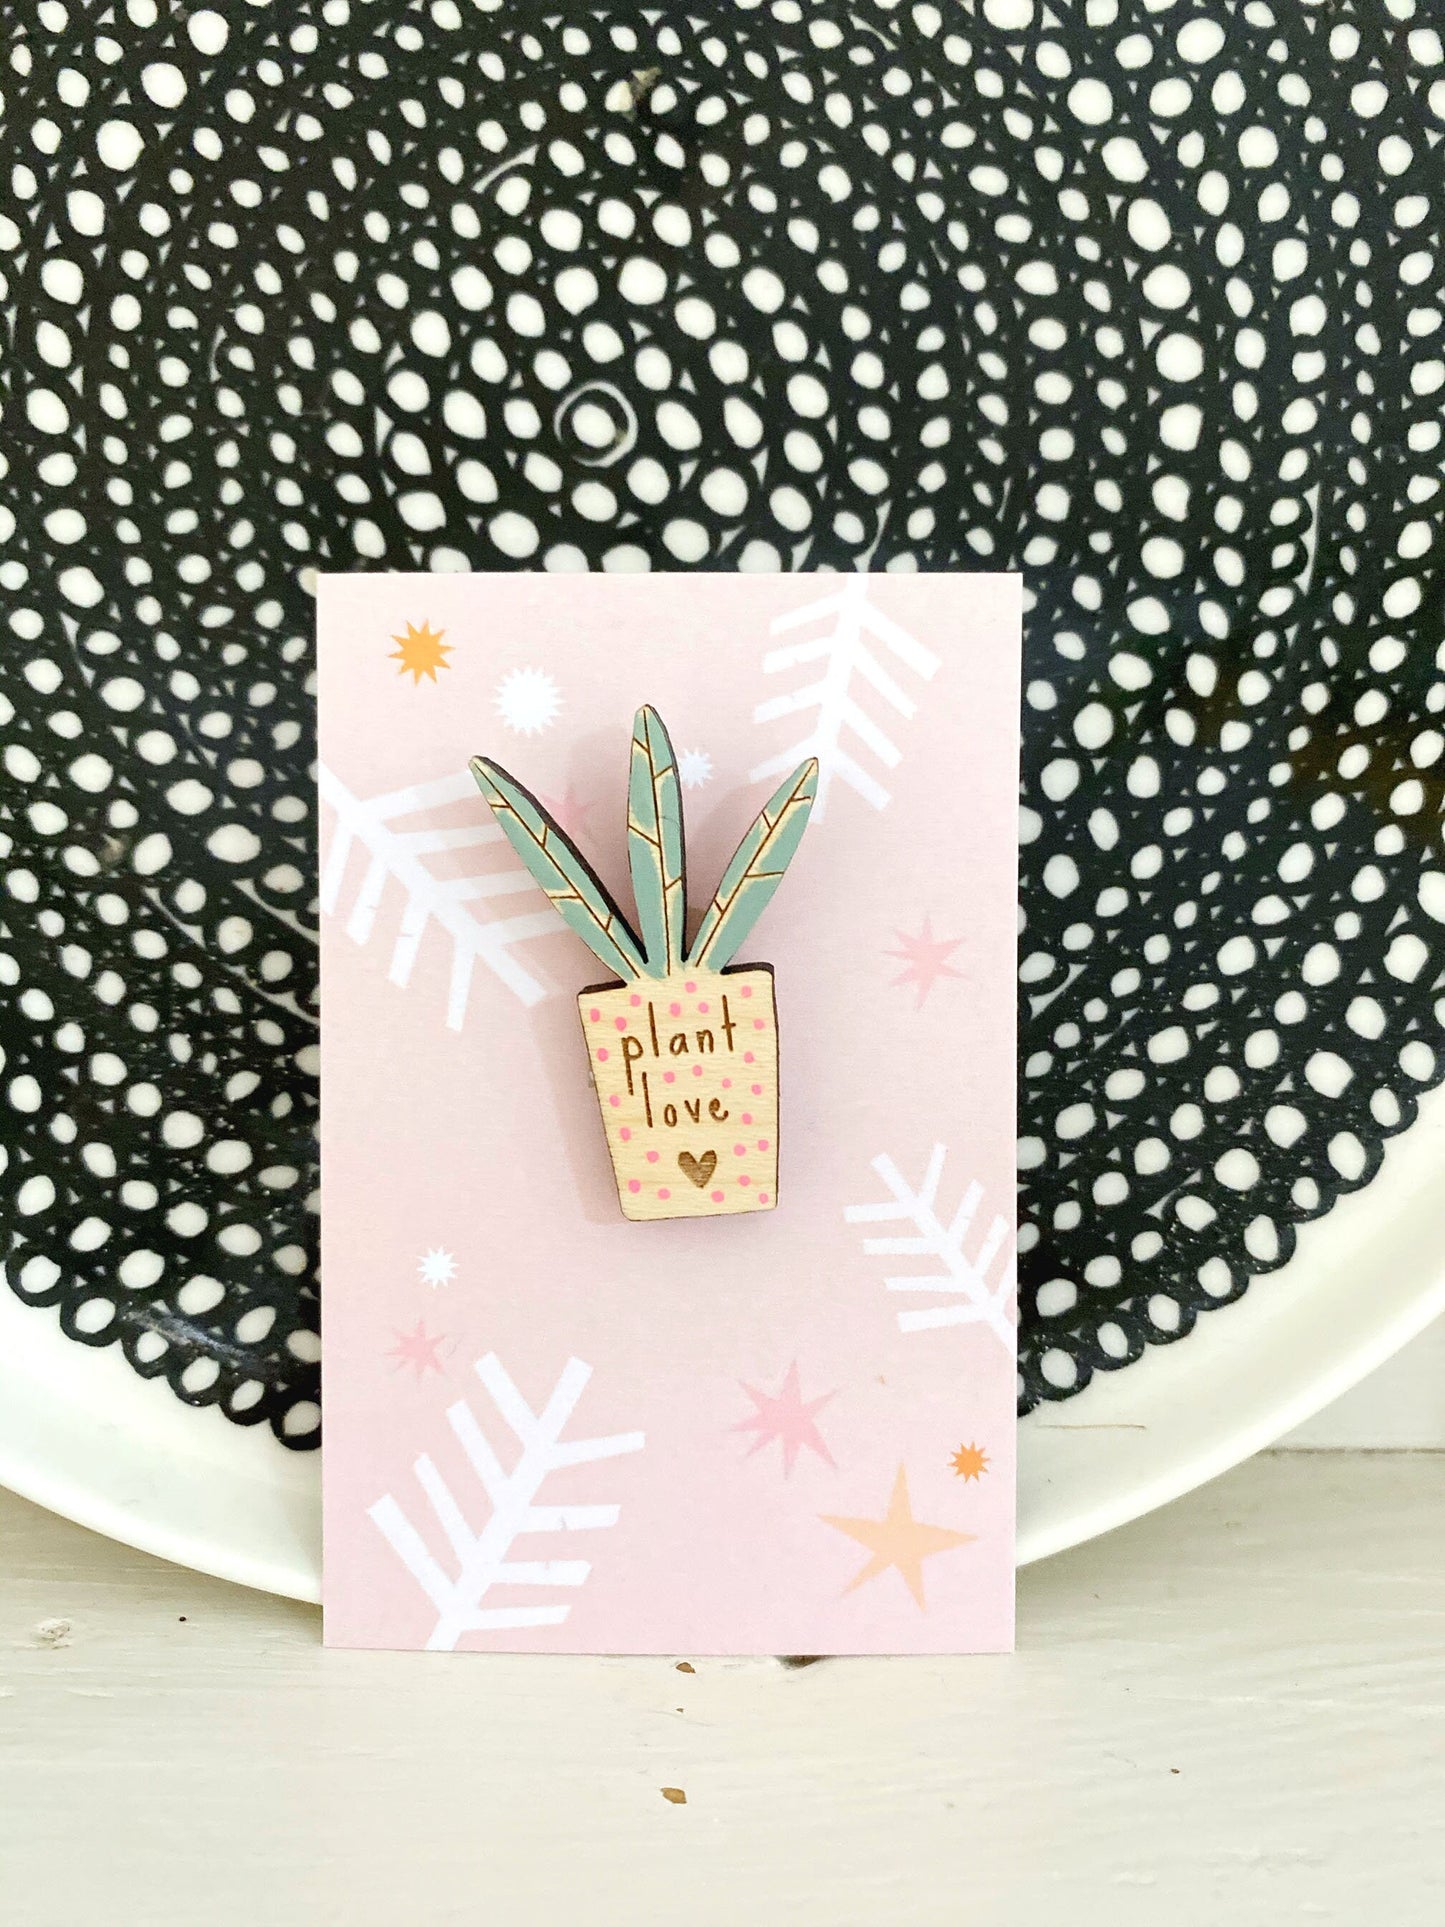 Plant love succulent wooden pin badge